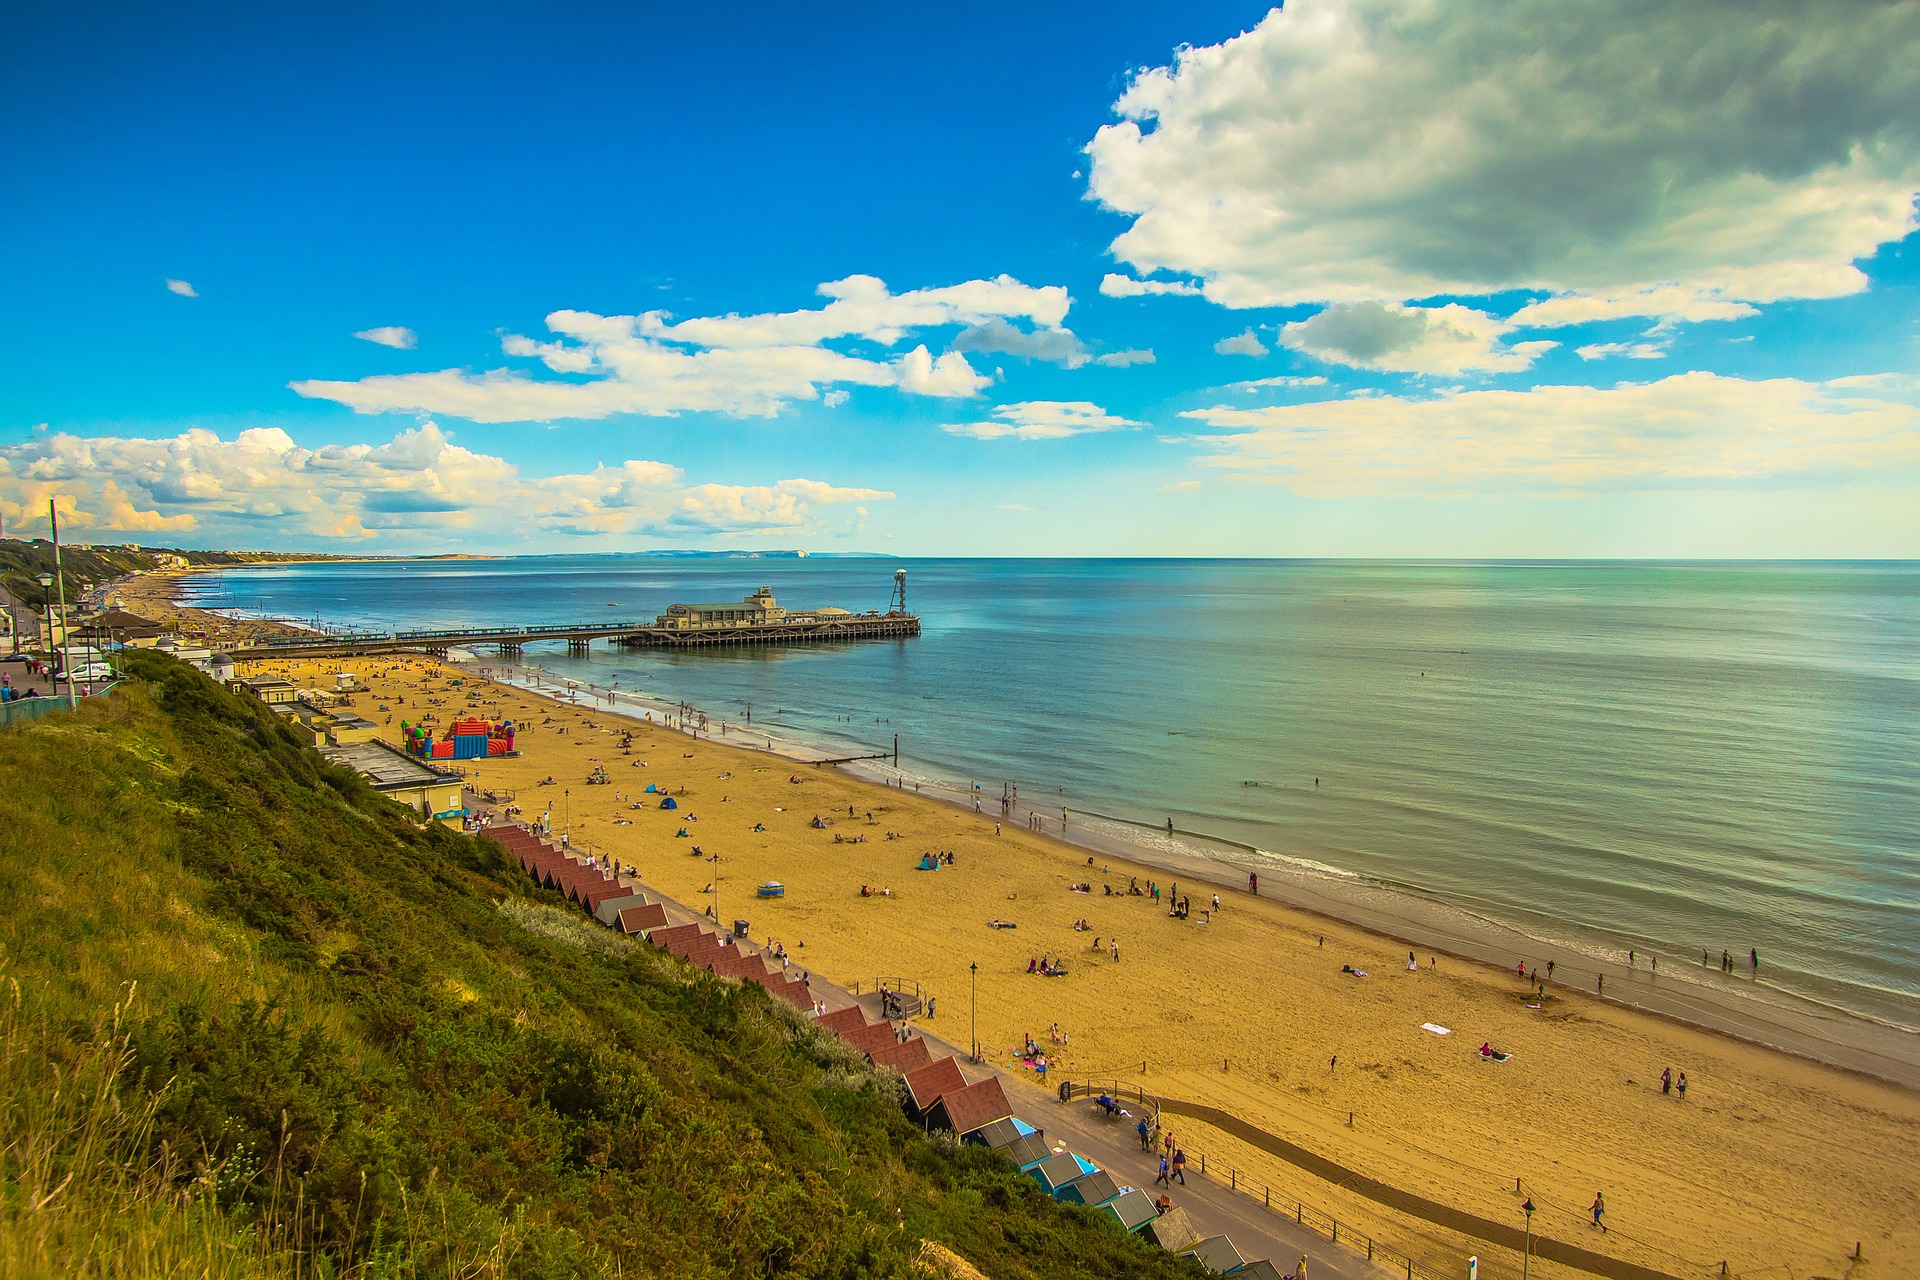 Is there a beach in the Uk worthy of the term sexy? Yes, there is